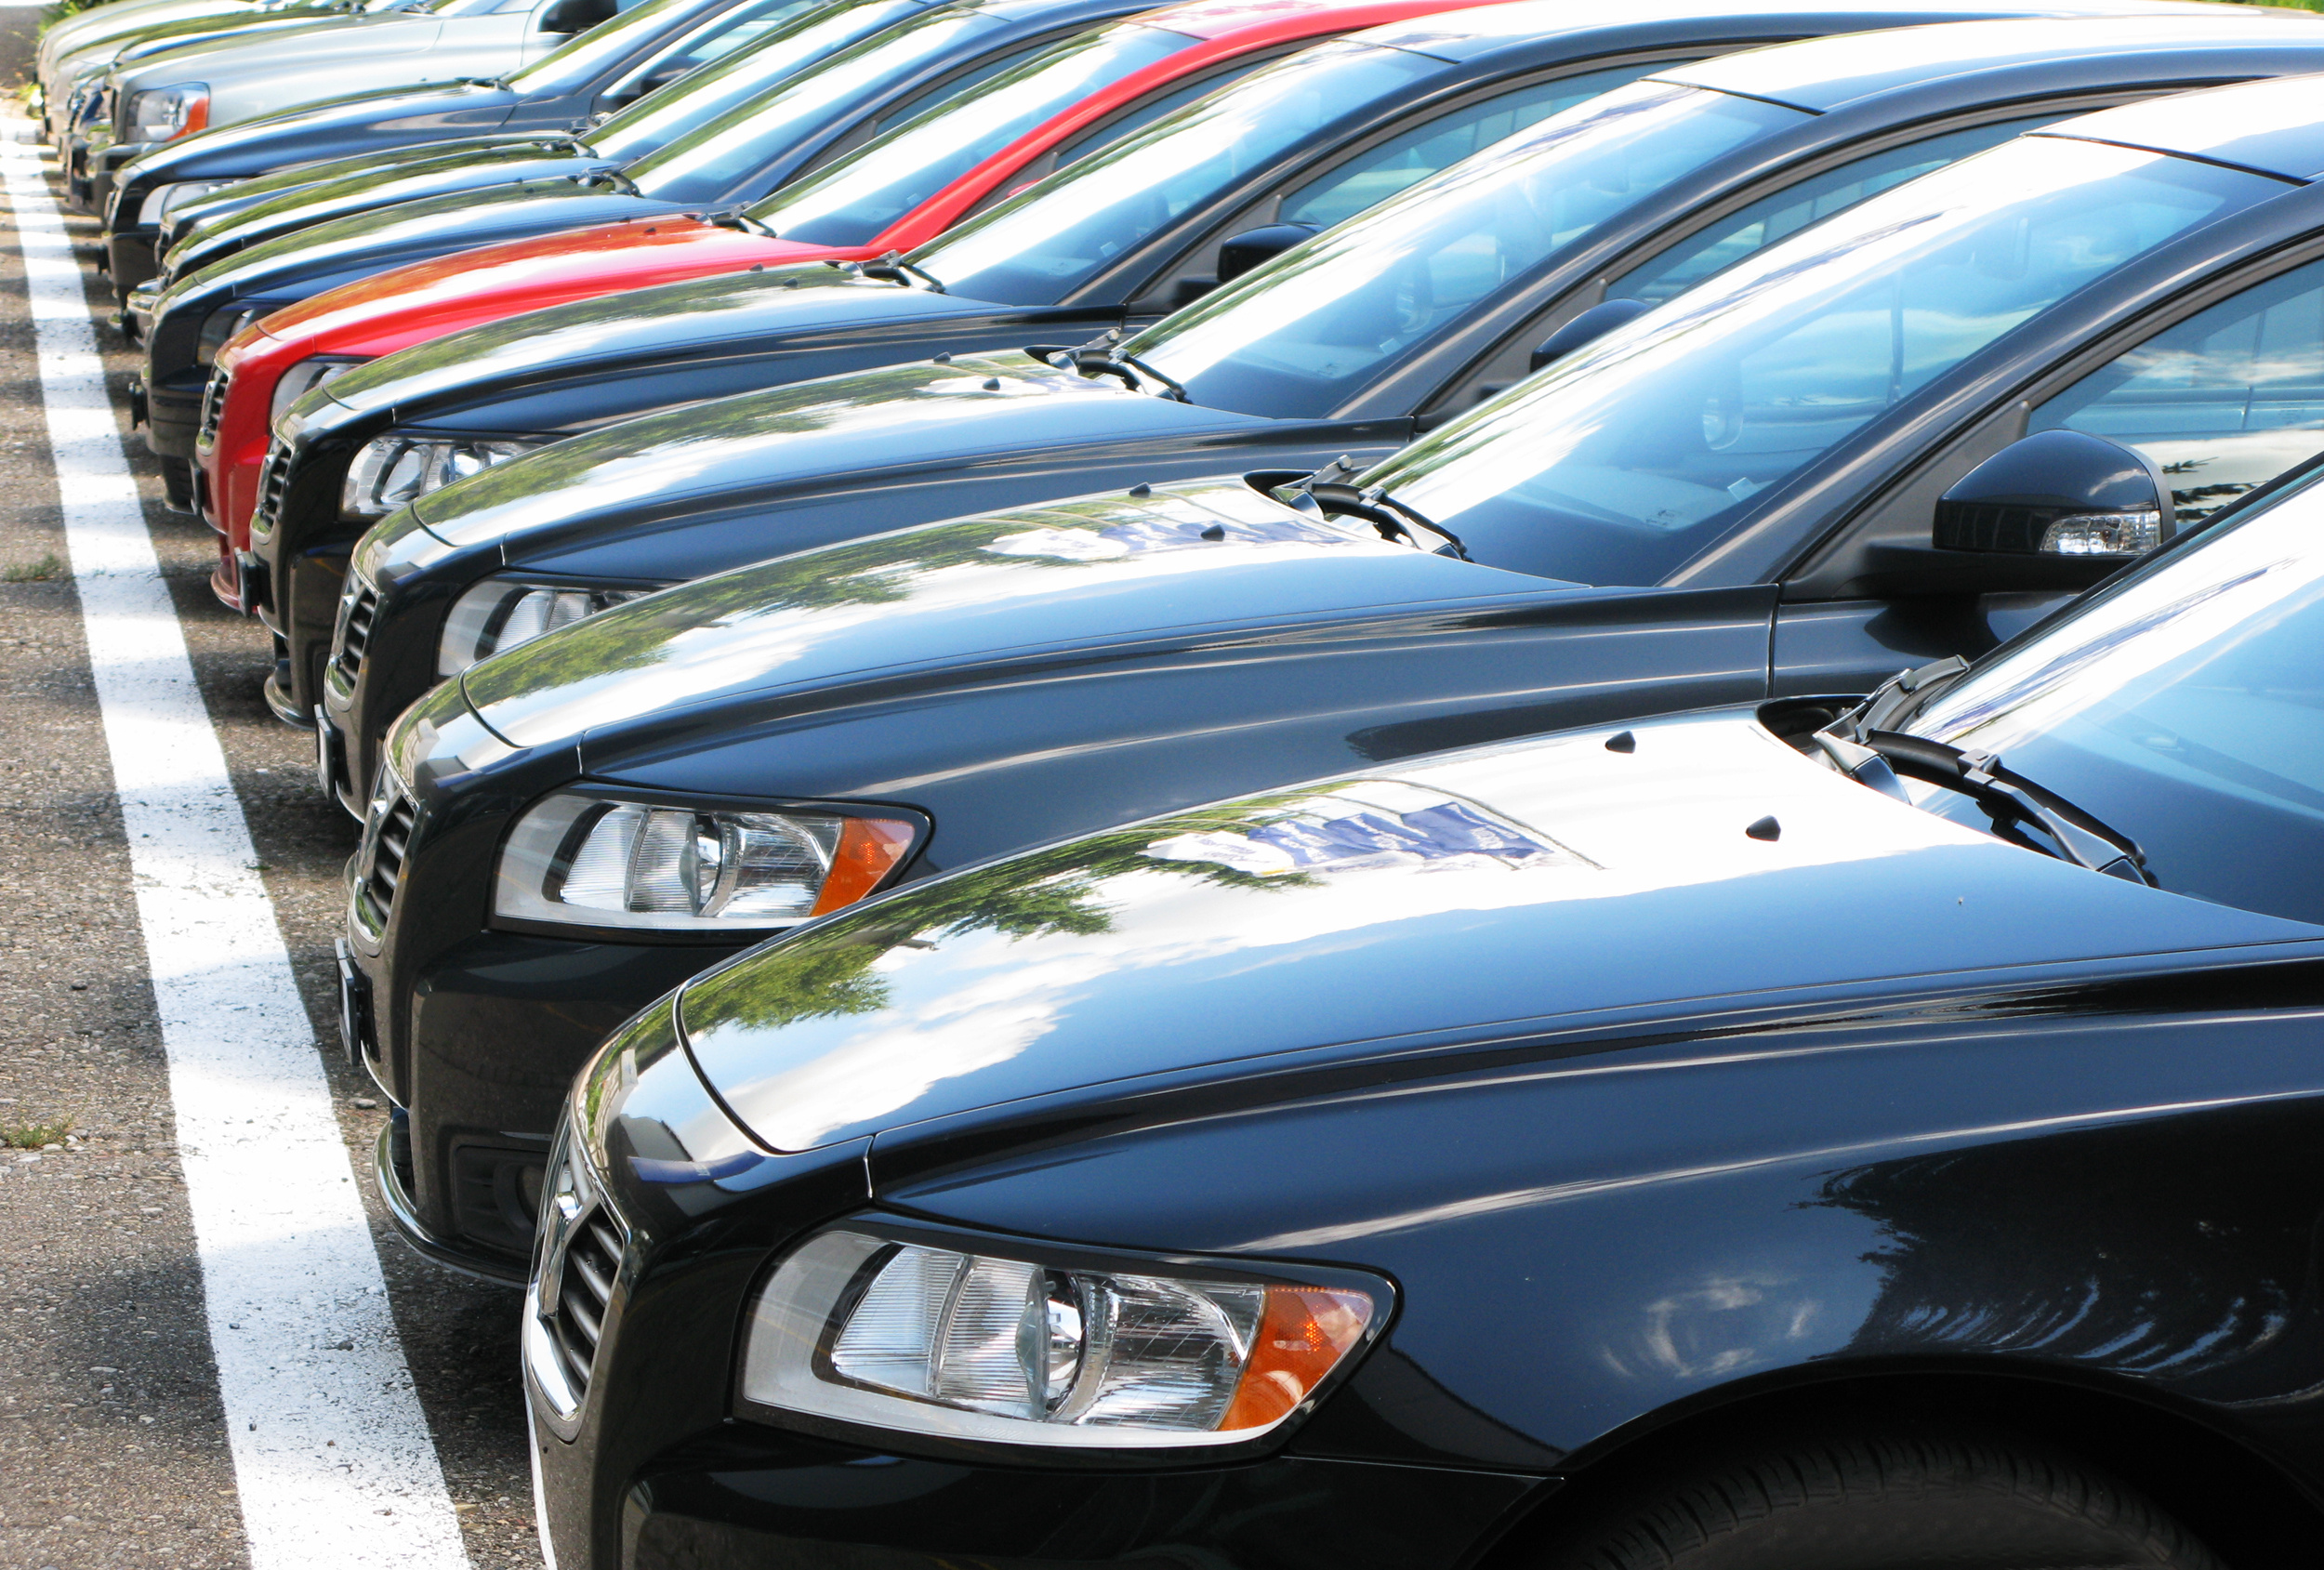 How to Check a Used Car's History Before You Buy It